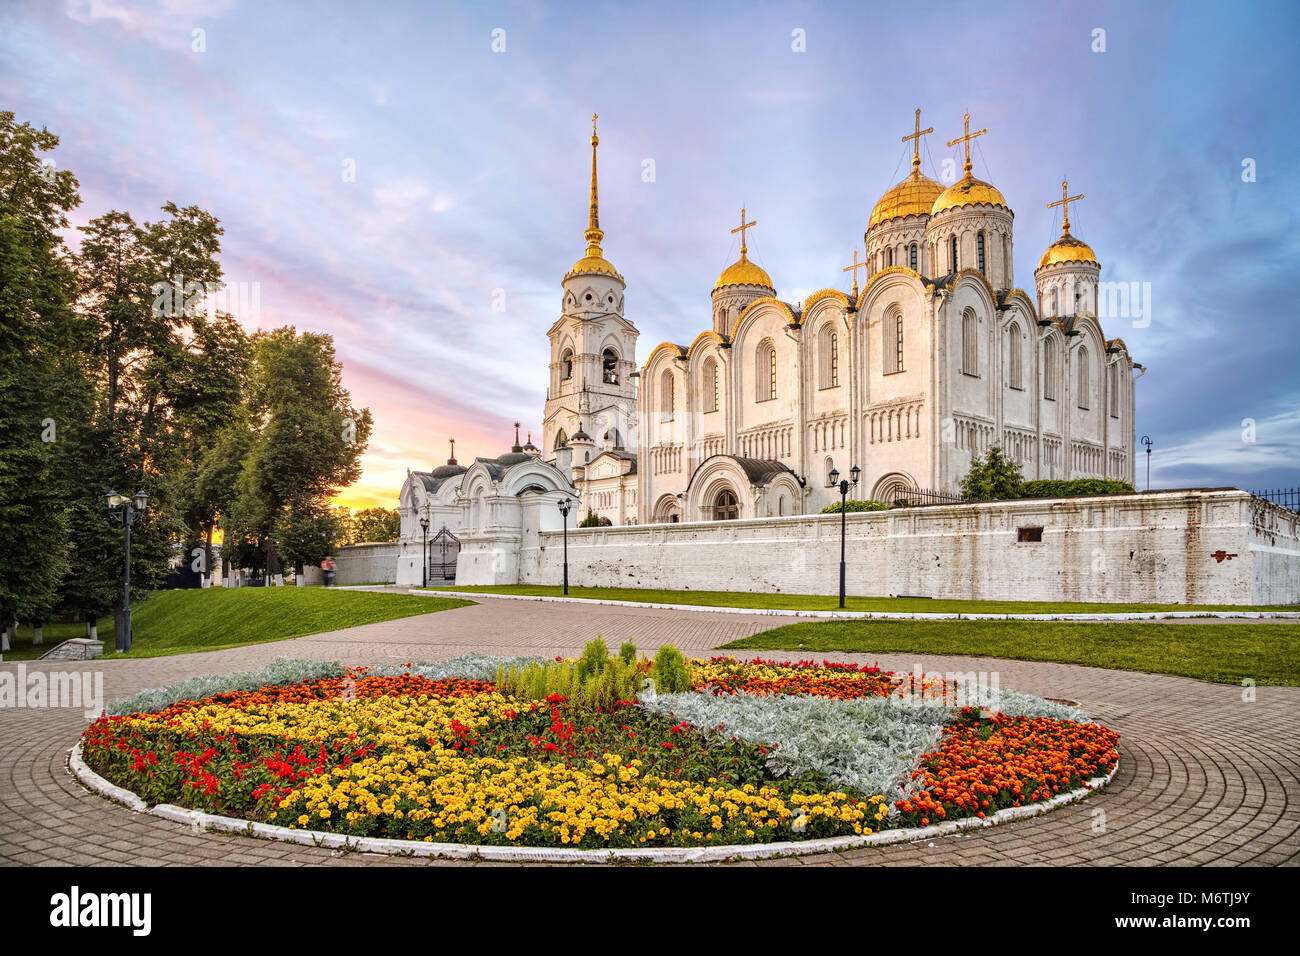 Uspenskiy cathedral on sunset with flowerbed on foreground in Vladimir, Russia Stock Photo